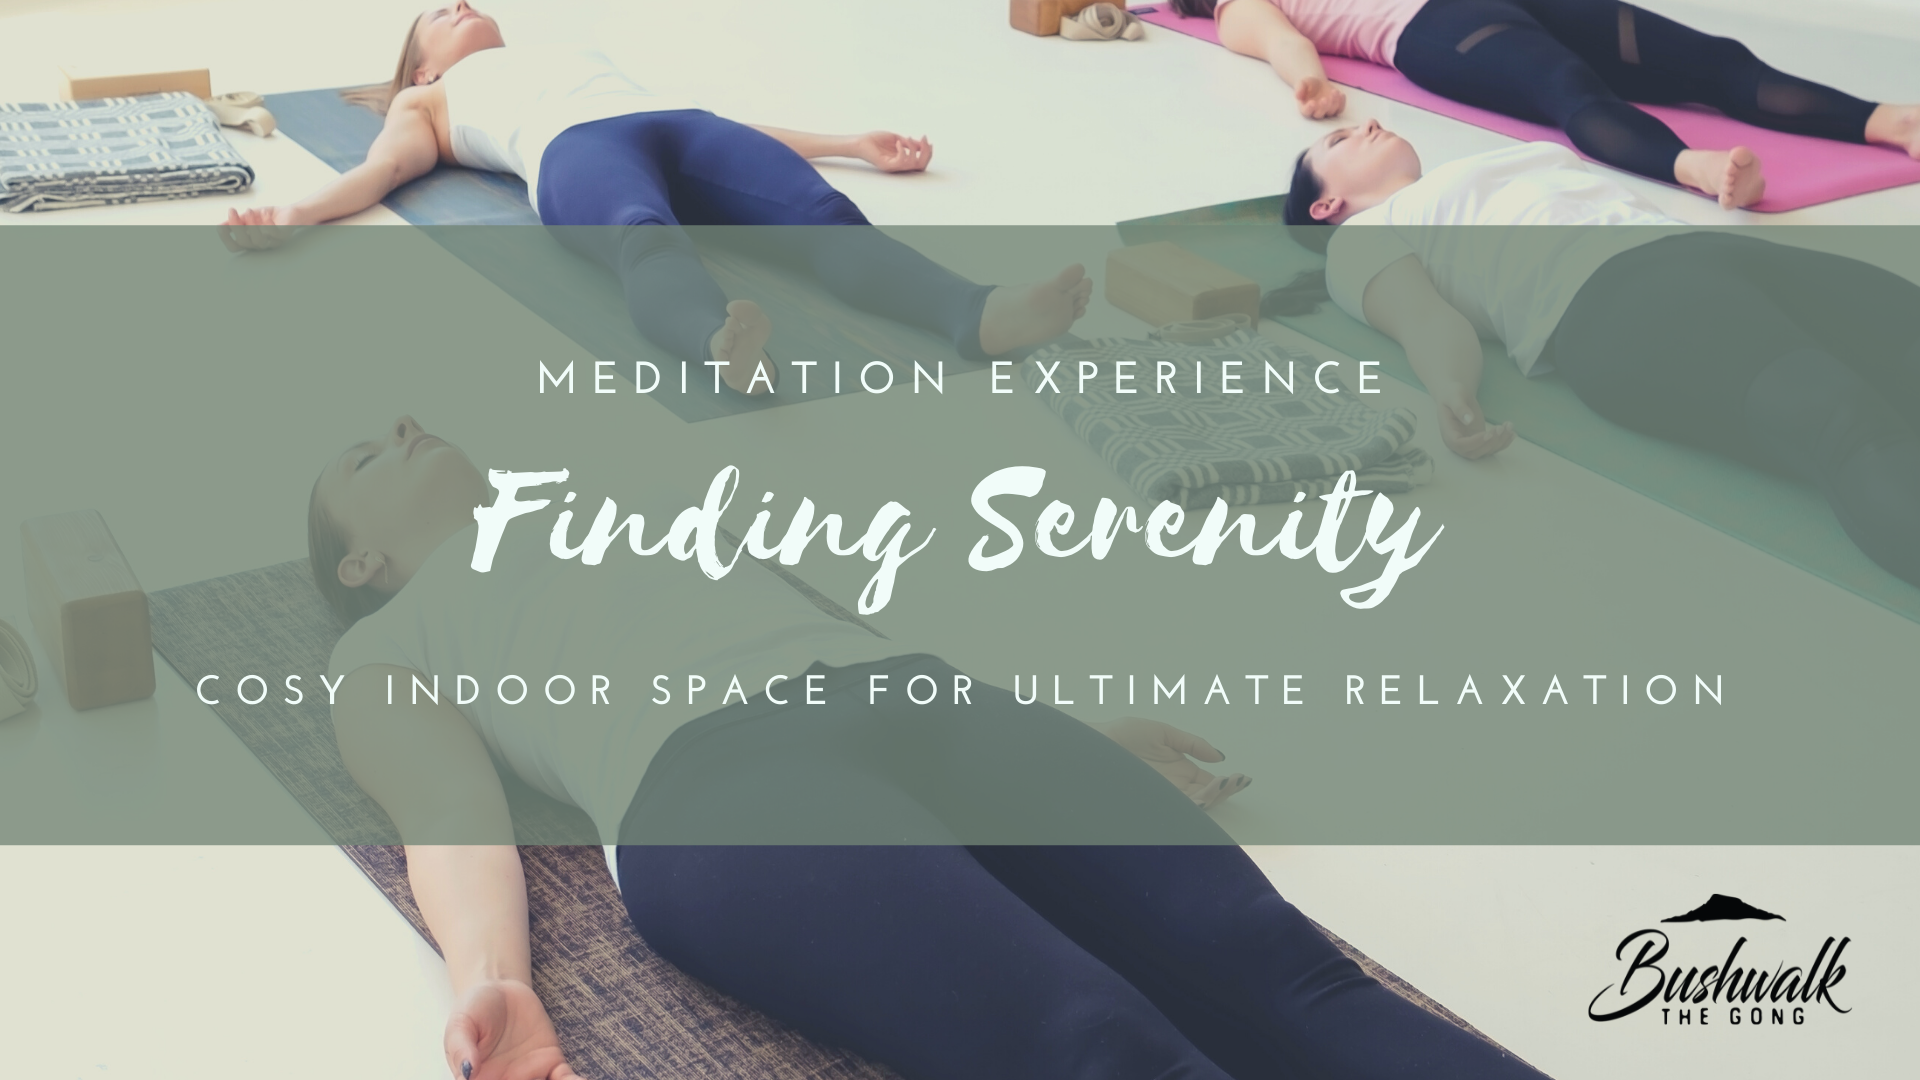 Meditation Experience to find serenity